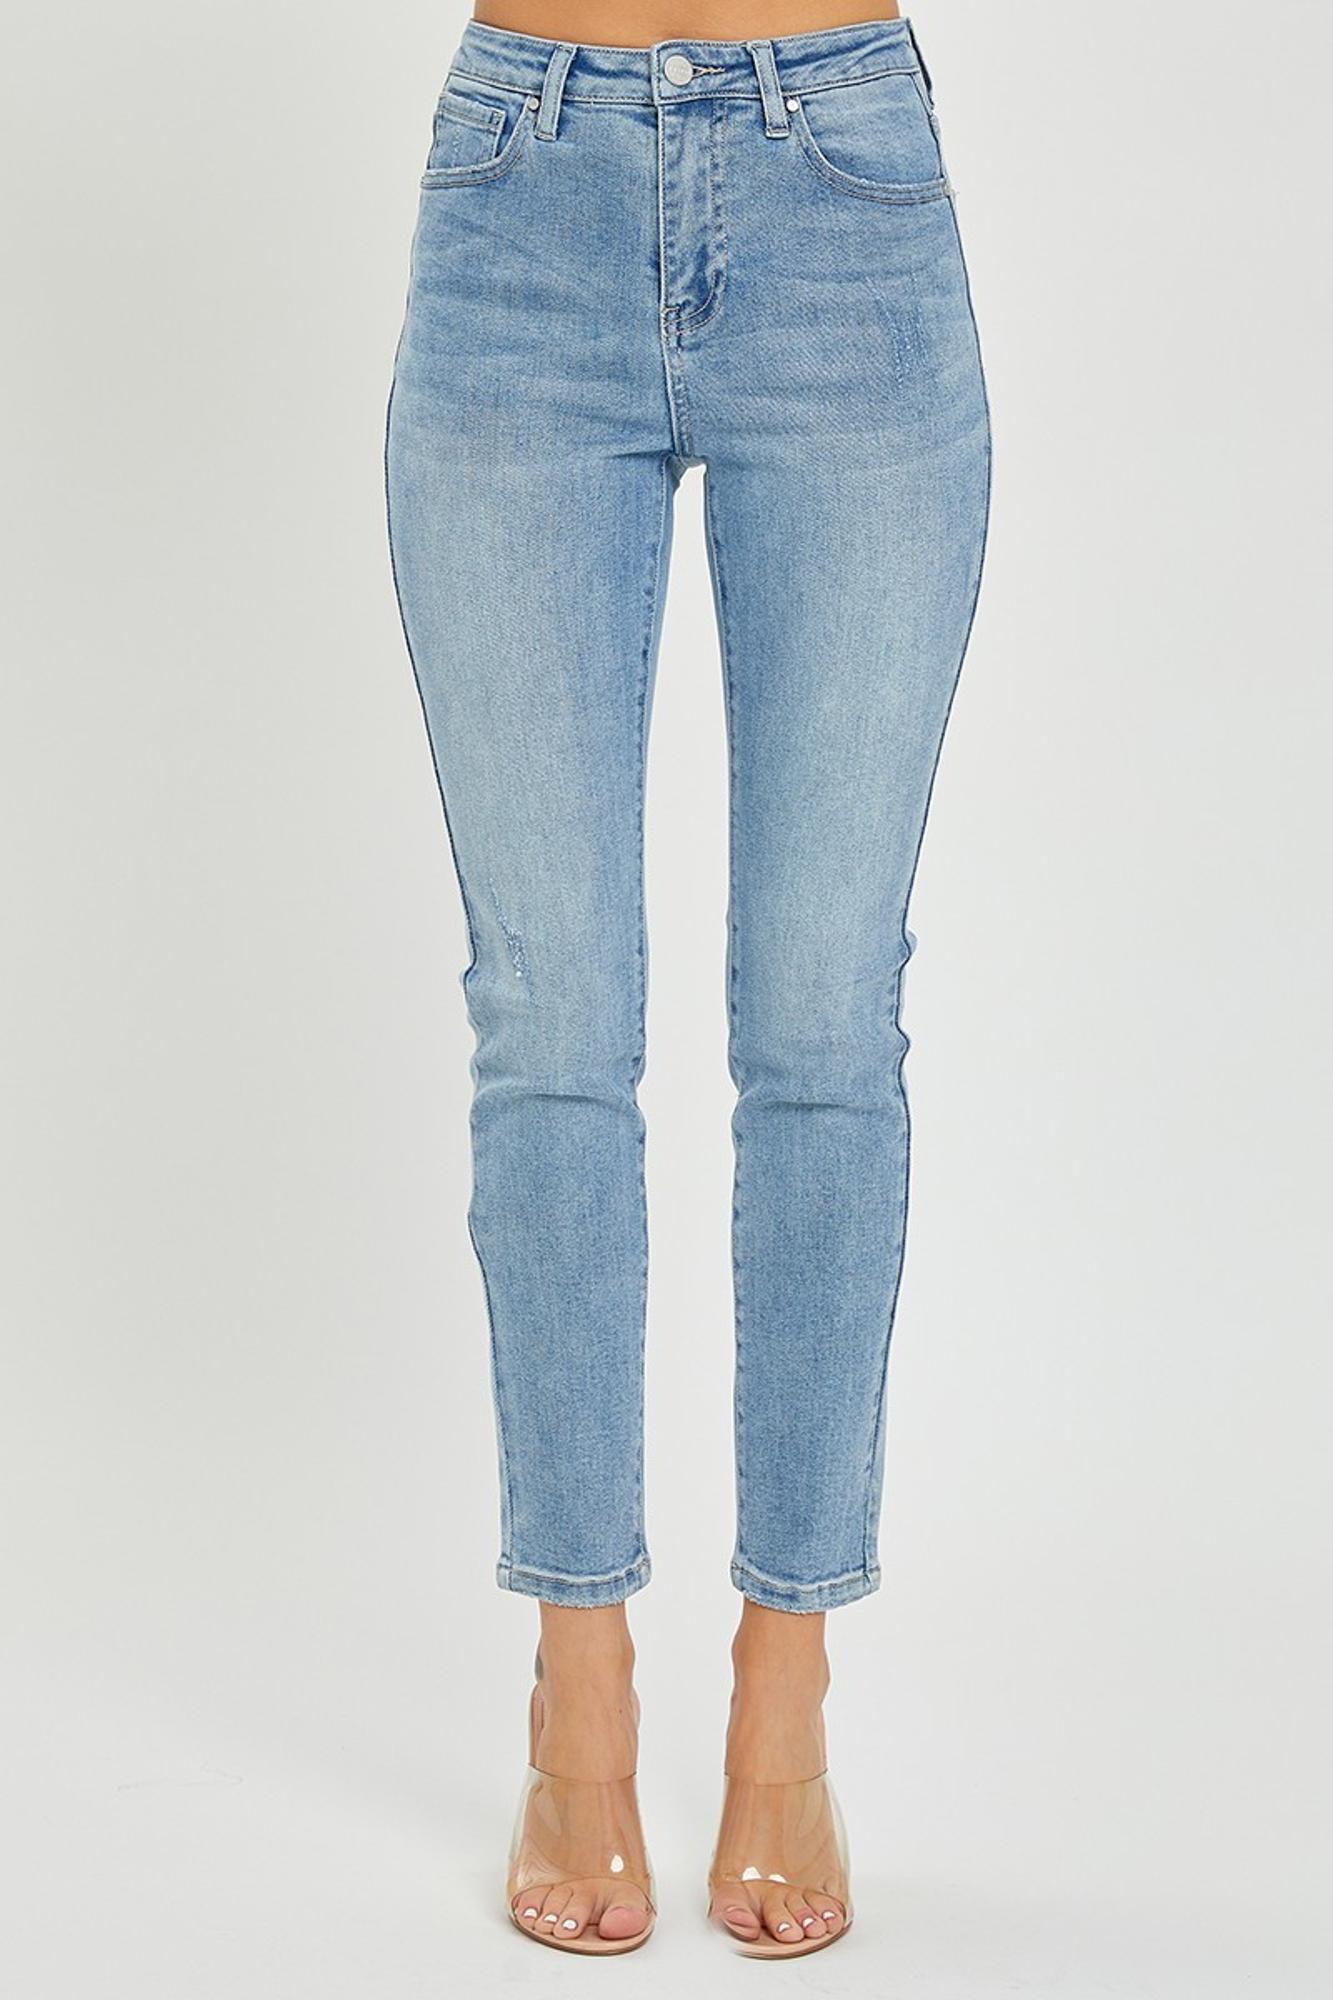 Ashley's Favorite High Rise Skinny Jeans